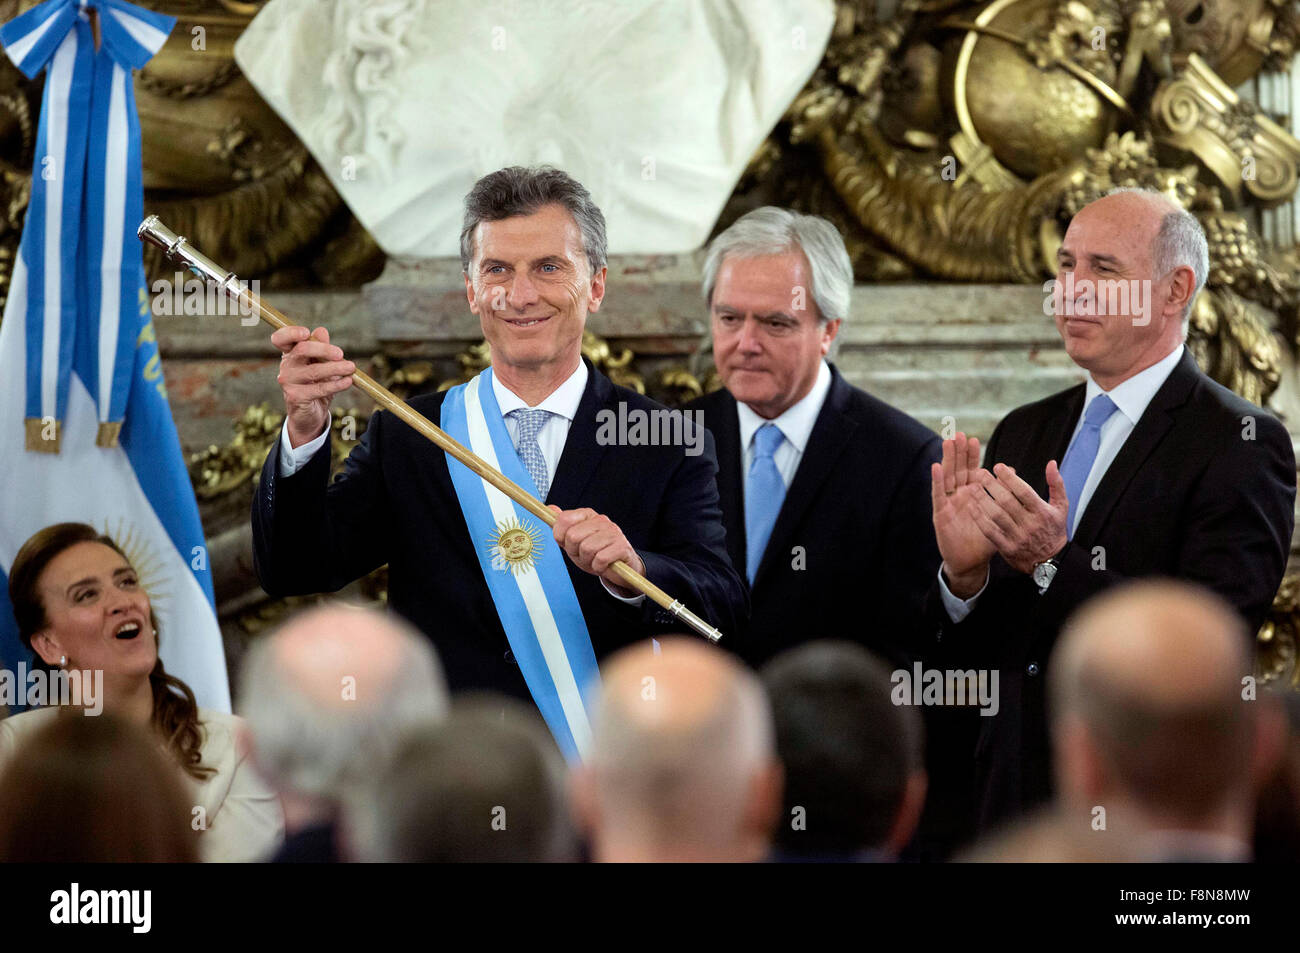 Buenos Aires, Argentina. 10th Dec, 2015. Argentina's new President Mauricio Macri (2nd L) shows the baton after receiving it from the provisional President of the Argentine Senate Federico Pinedo (2nd R) at White Room of Casa Rosada (Pink House), in Buenos Aires city, capital of Argentina, on Dec. 10, 2015. Mauricio Macri on Thursday inaugurated as new Argentine President, succeeding Cristina Fernandez. Credit:  Martin Zabala/Xinhua/Alamy Live News Stock Photo